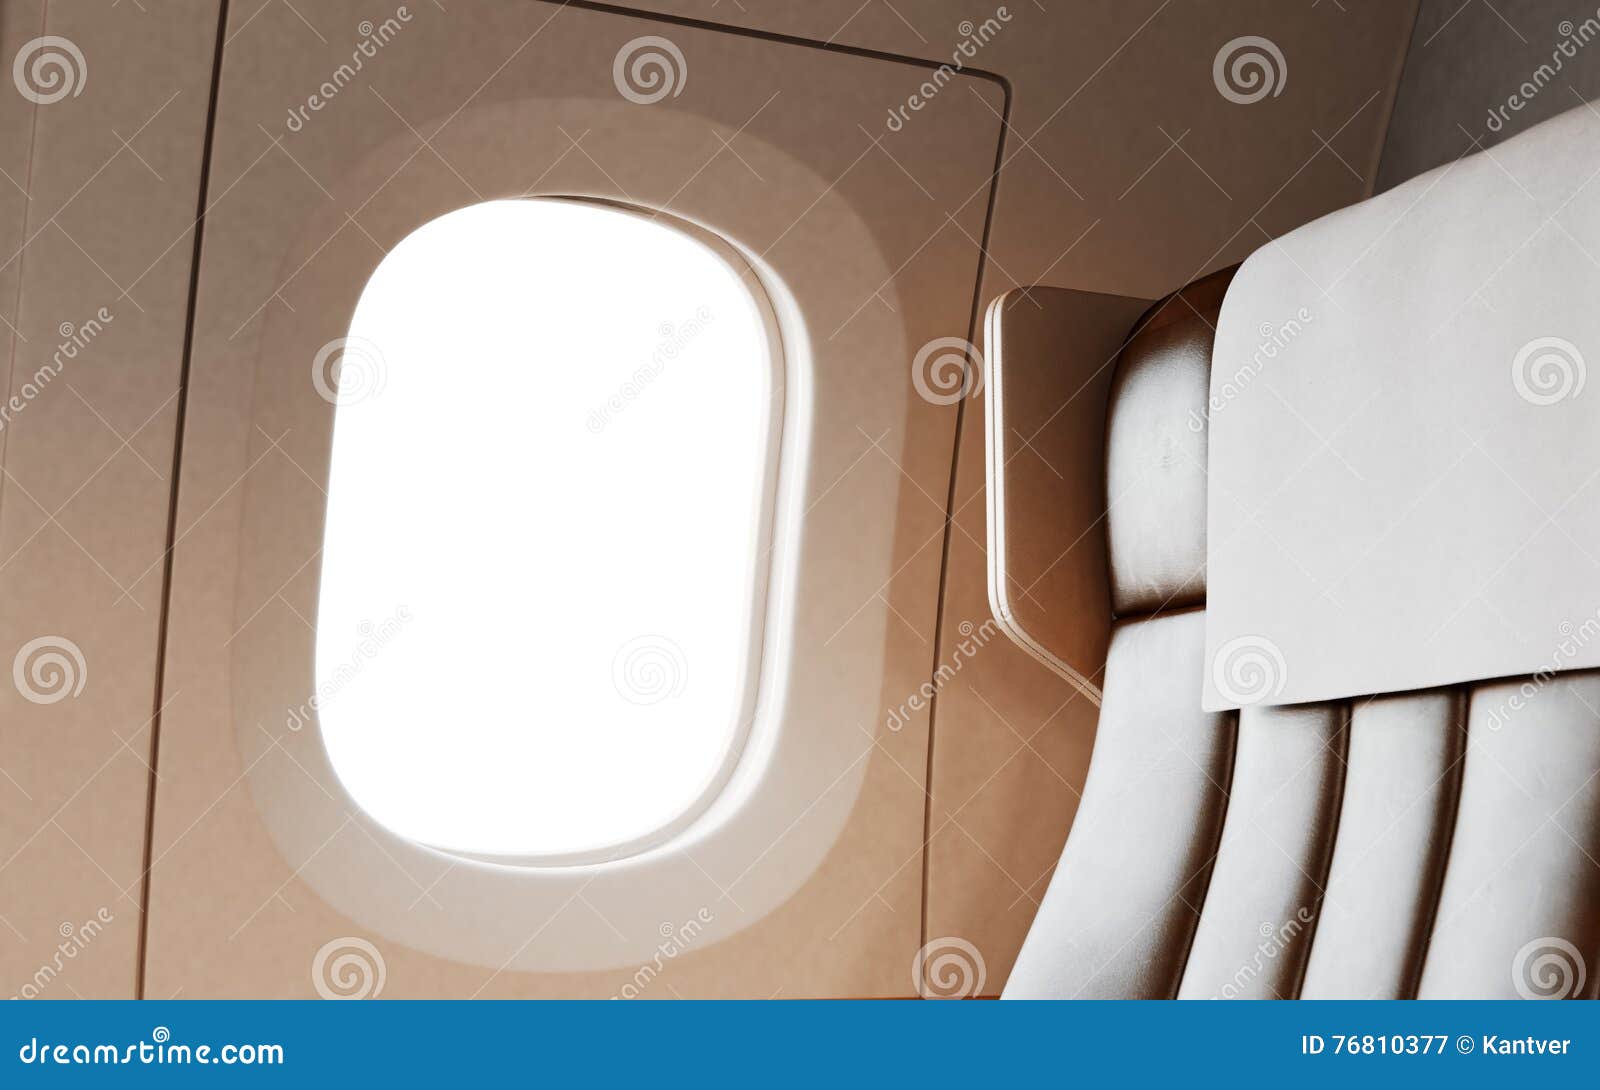 empty leather chair background inside interior first class airplane private jet. blank white illuminator mockup ready